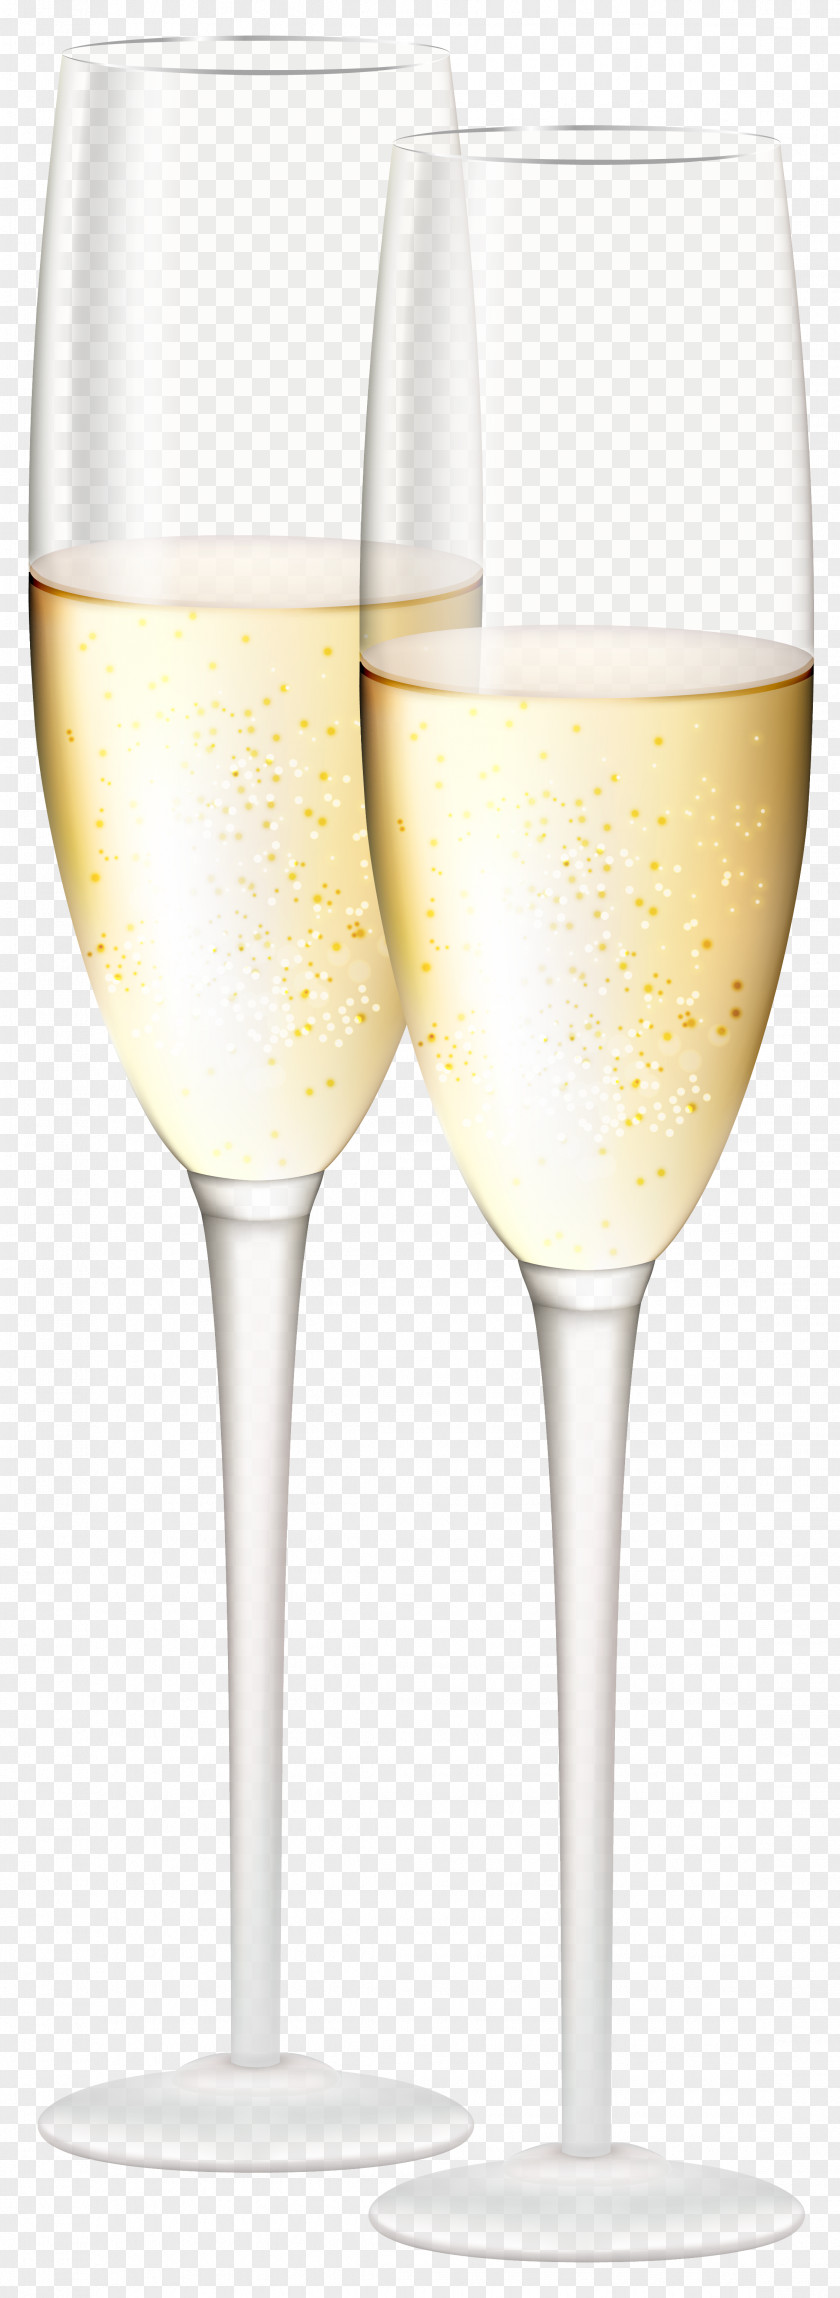 Champagne Glasses Transparent Clip Art Image White Wine Glass Cocktail PNG